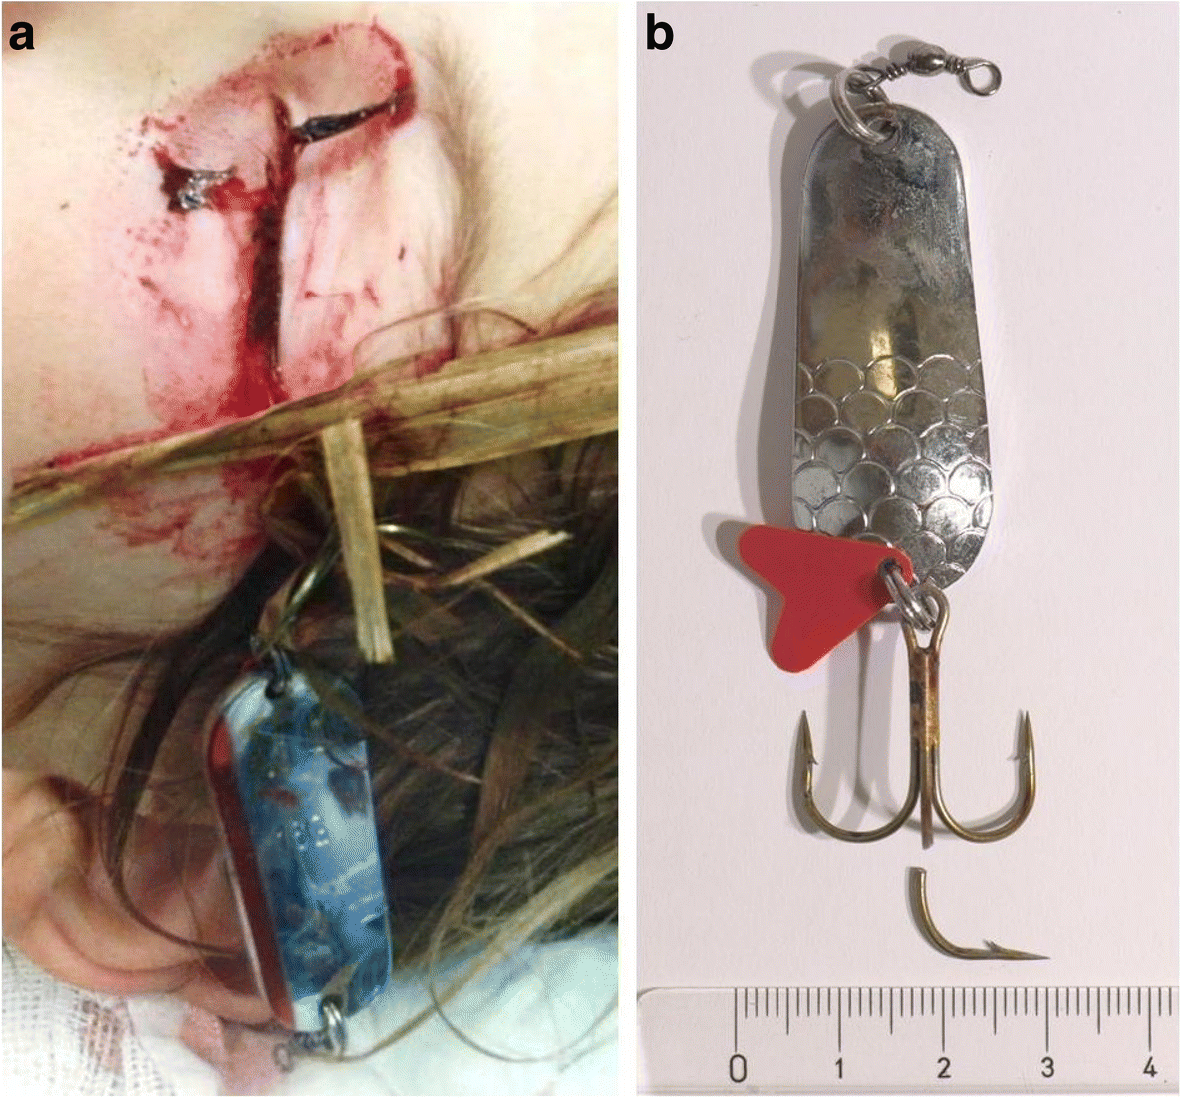 Open globe and penetrating eyelid injuries from fish hooks